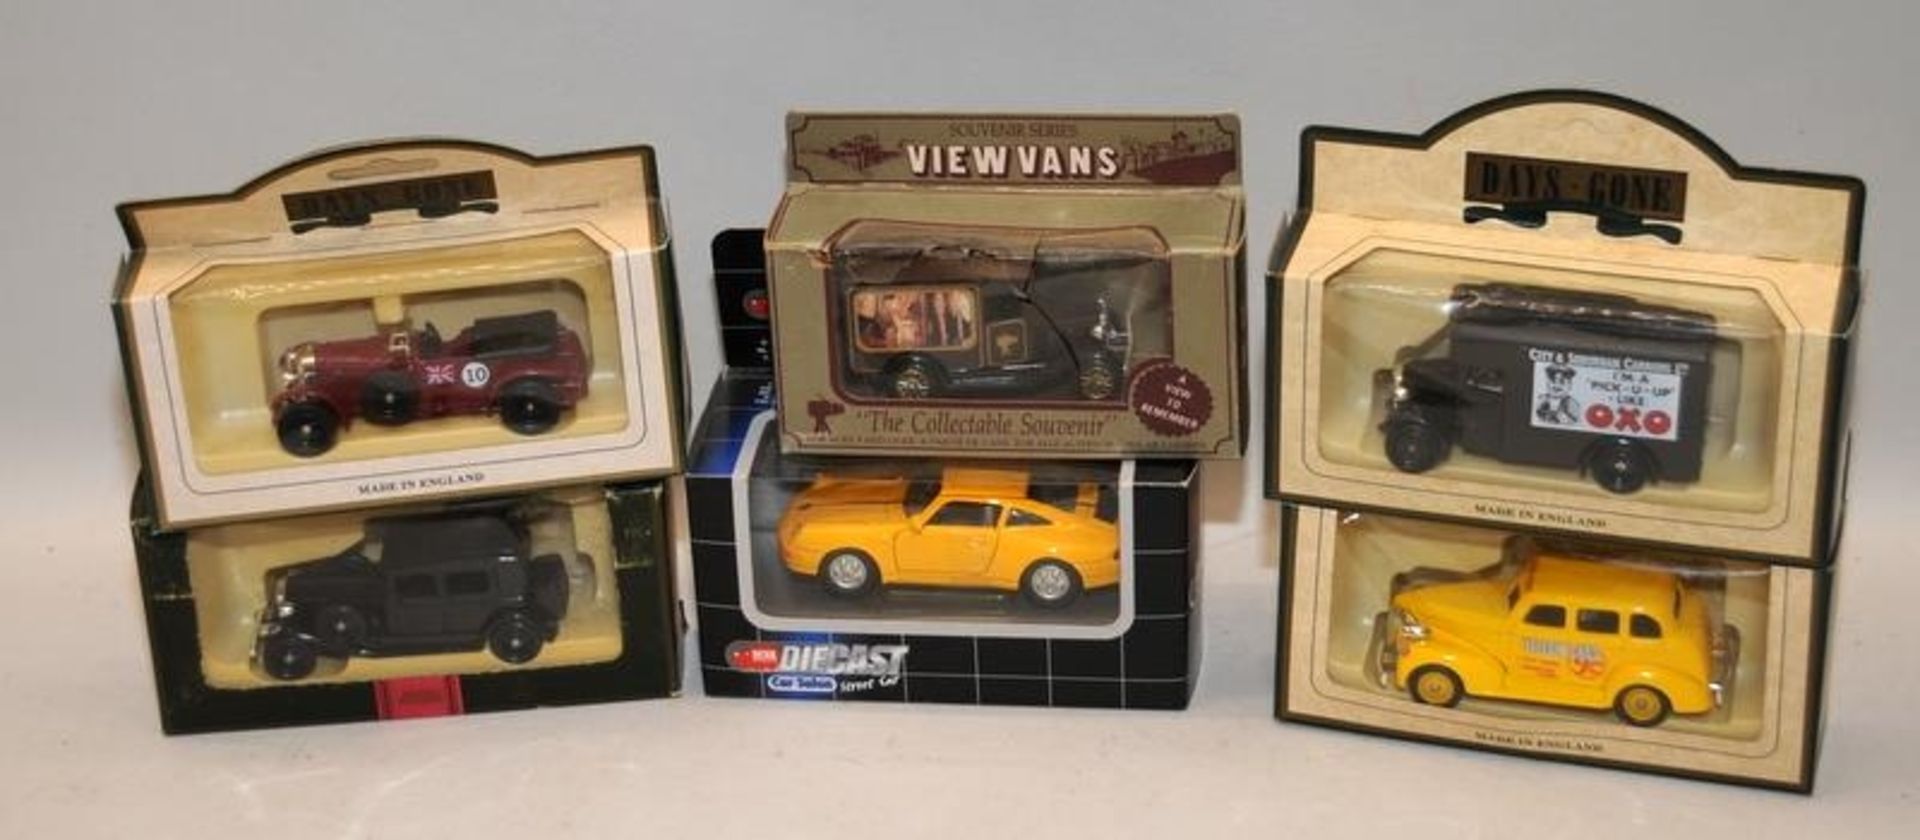 Collection of die-cast model vehicles, Matchbox, Lledo, Oxford etc. 22 in lot, all boxed - Image 5 of 6